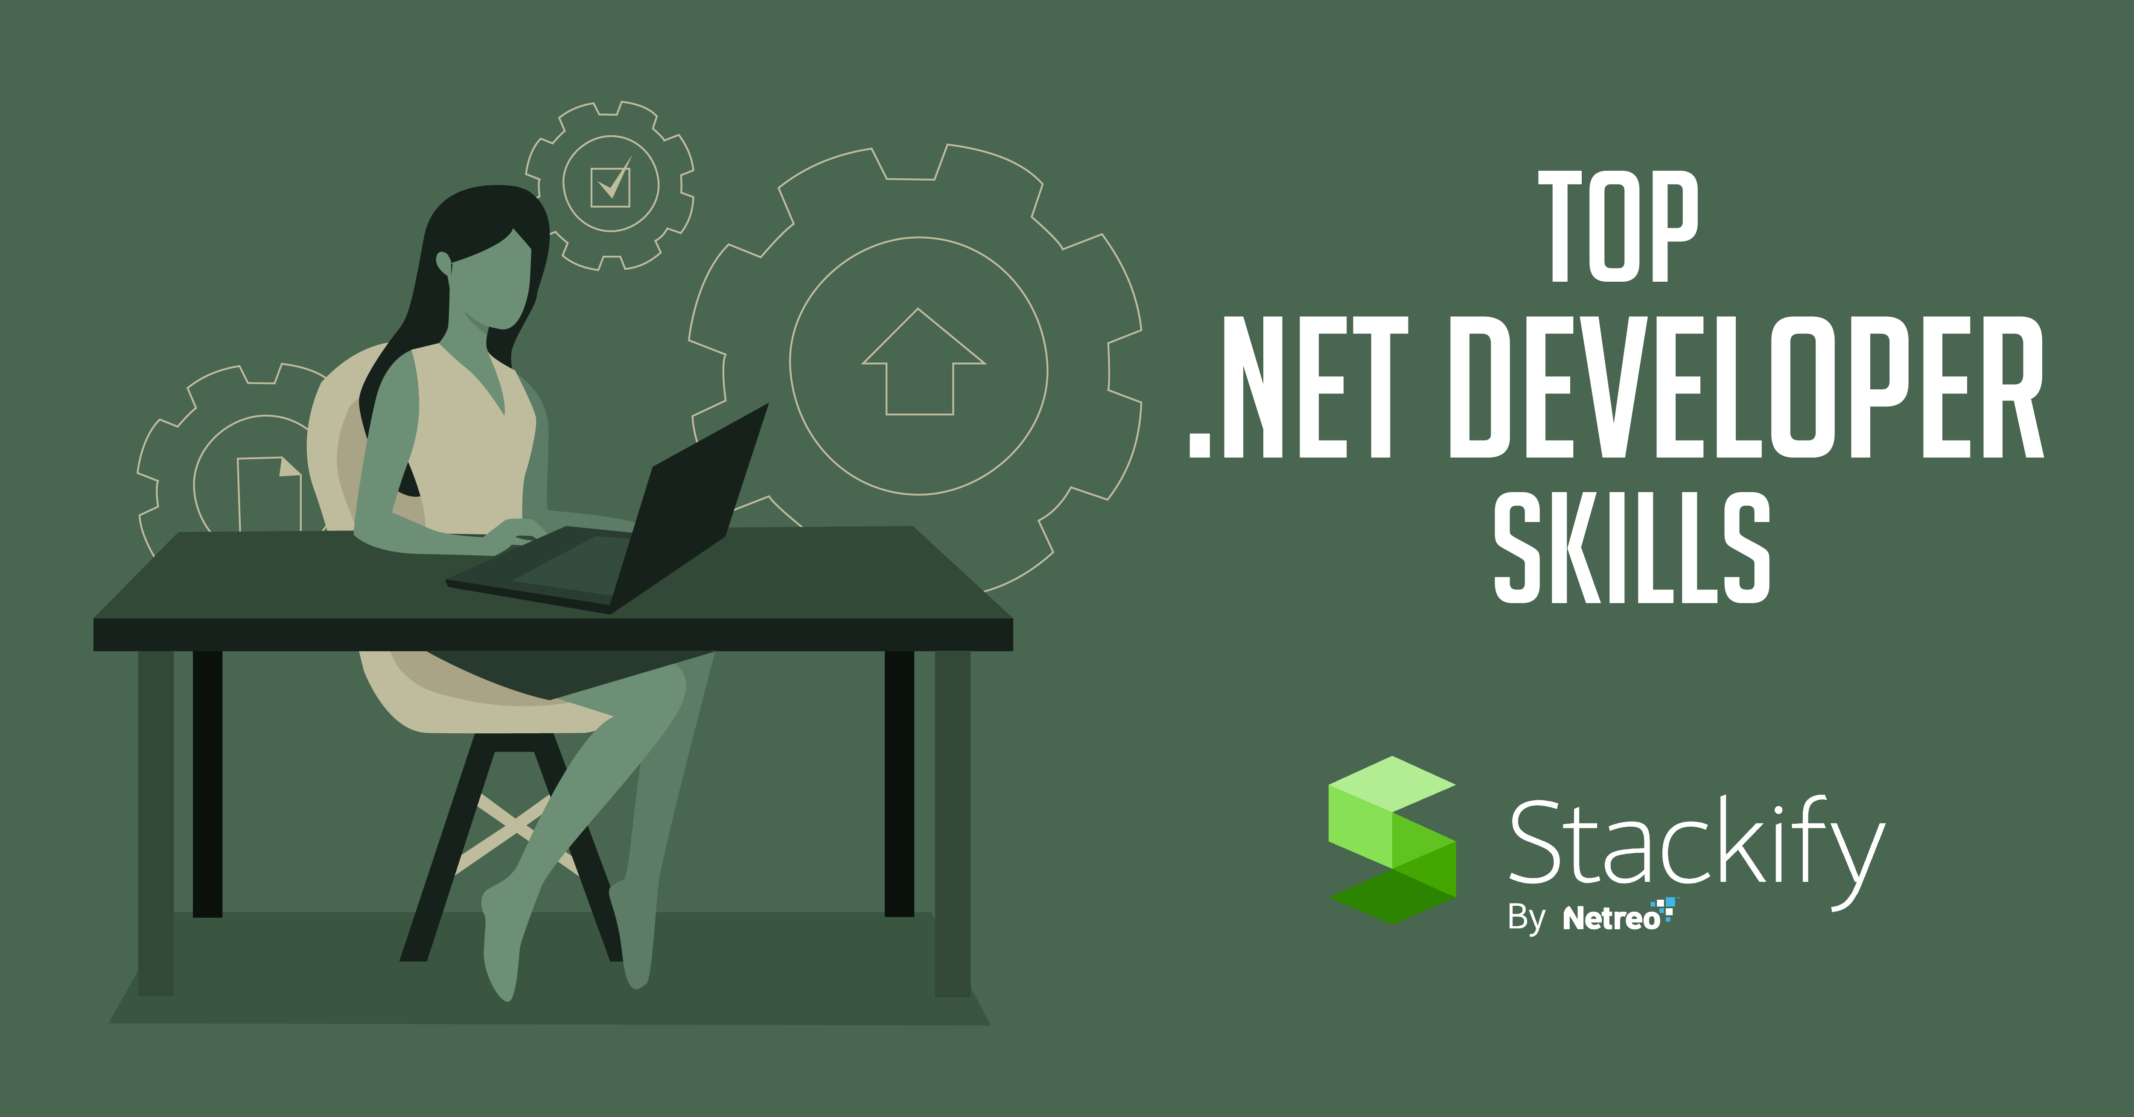 Top .NET Developer Skills According to Tech Leaders and Experts